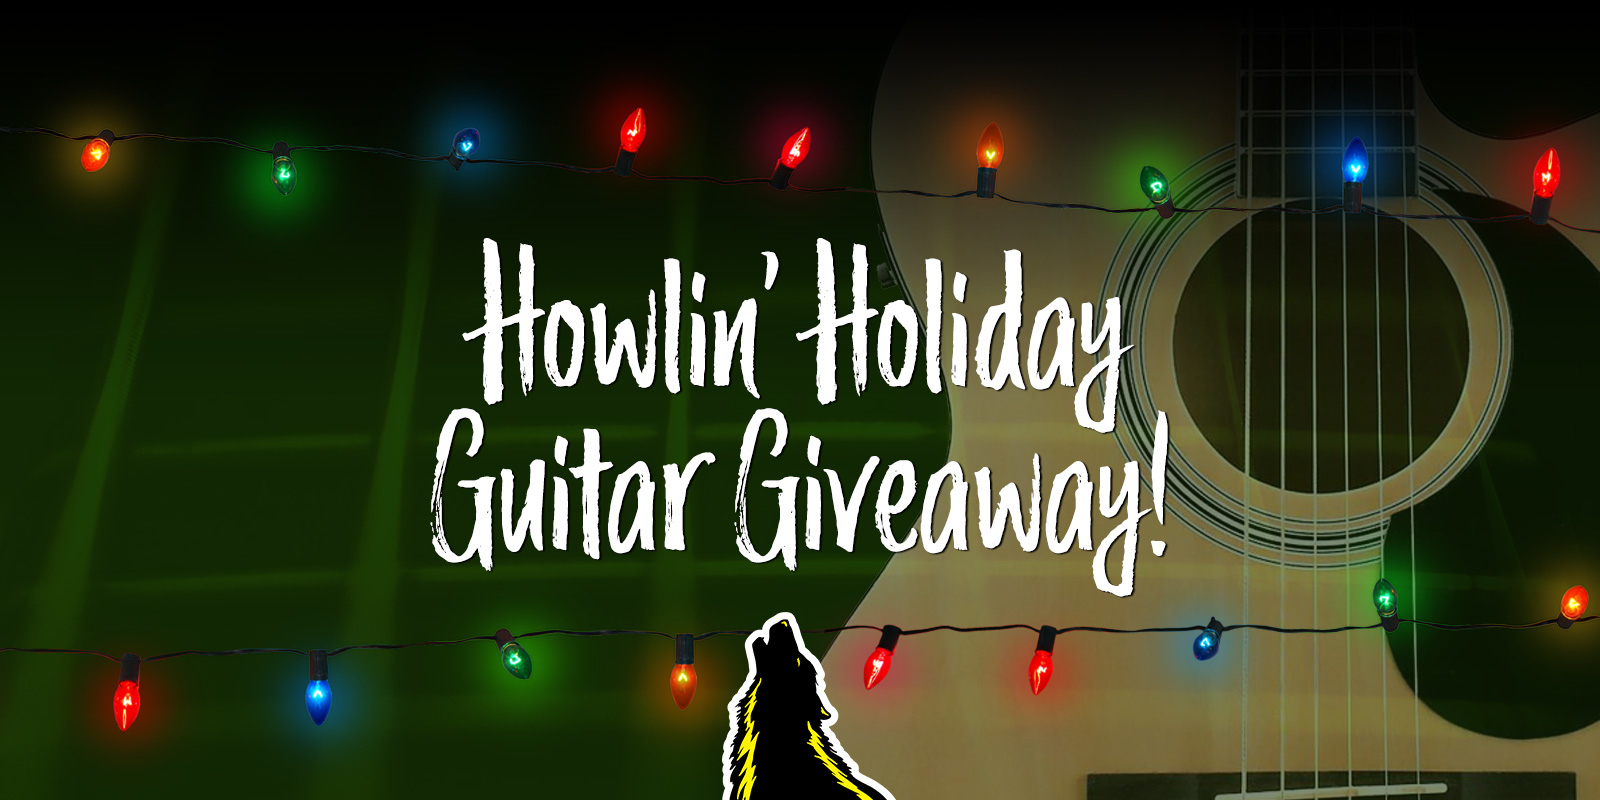 The Wolf’s Howlin’ Holiday Guitar Giveaway!